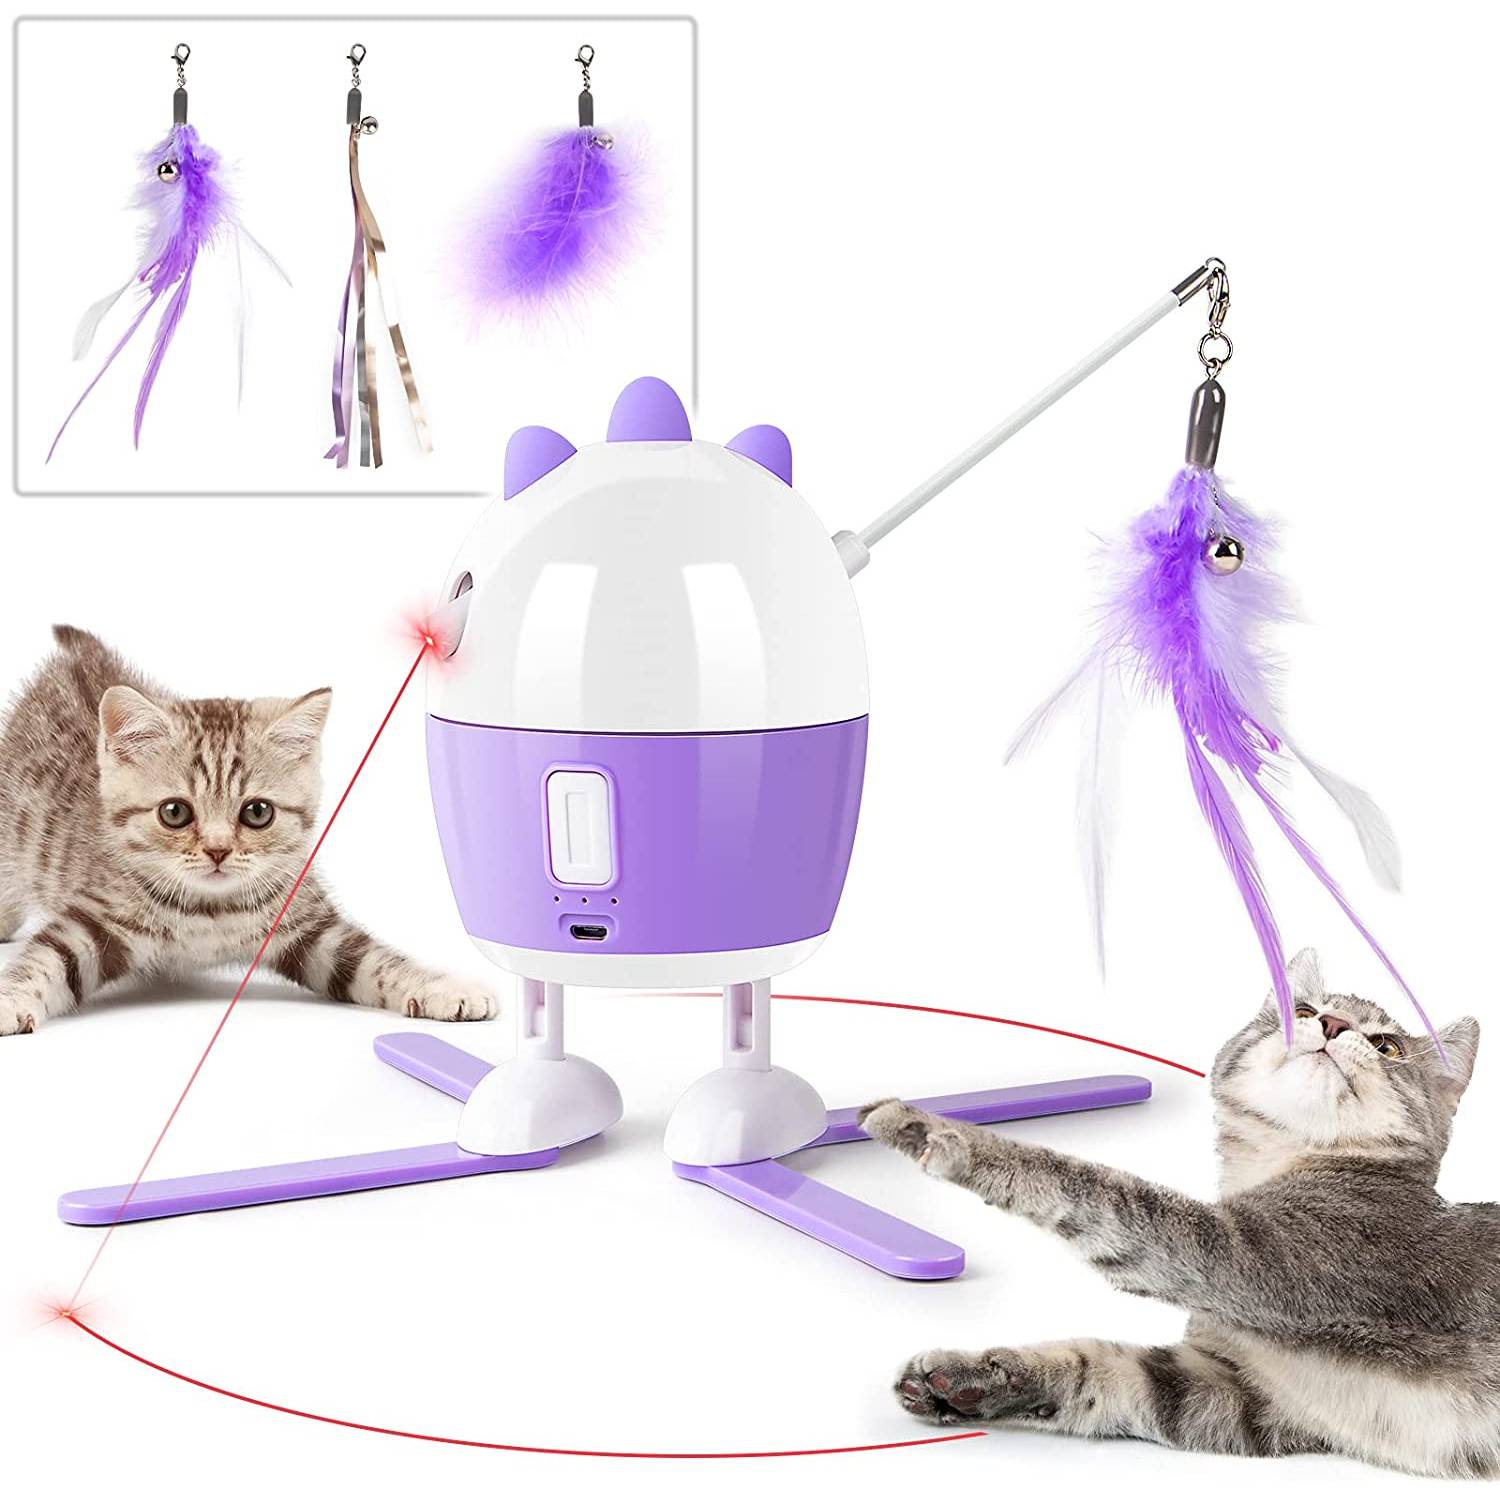 7 Adjustable Patterns Pet Laser Pointer Toys for Indoor Cats Dogs Long Range 3 Modes Training Exercise Chaser Interactive Toy USB Recharge ANDICEQY Cat Laser Toy 